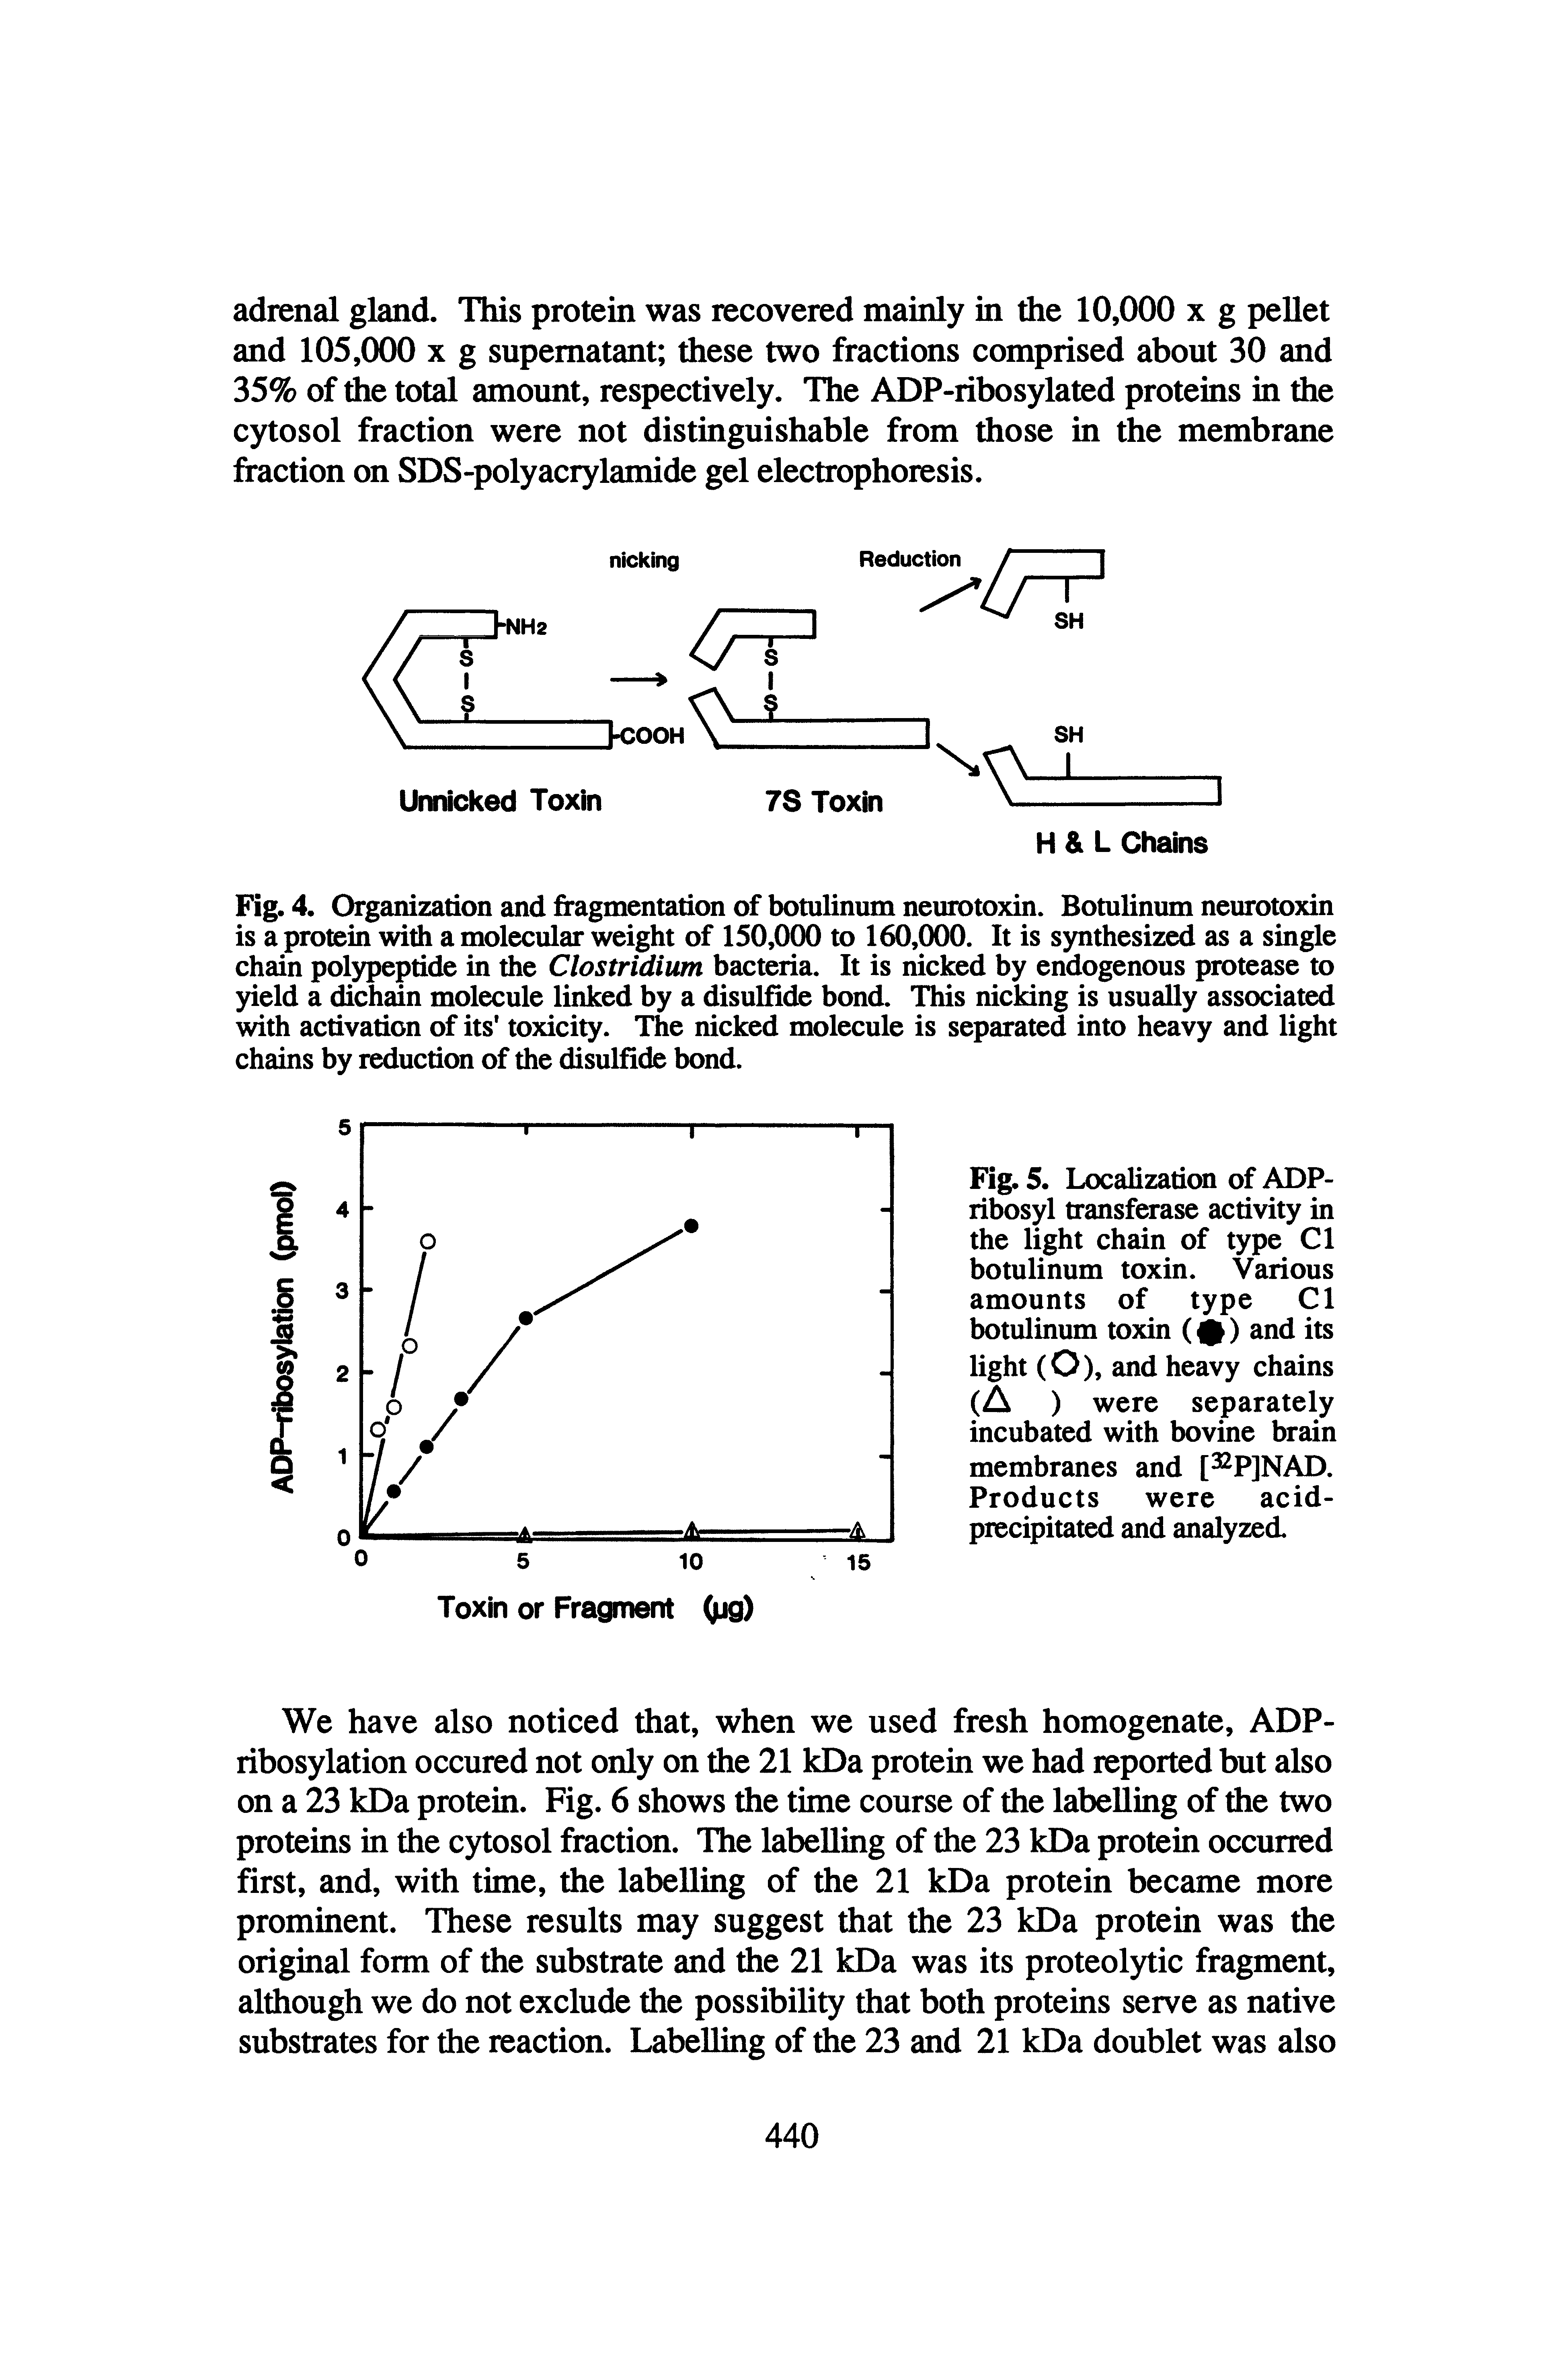 Fig. 4. Organization and fragmentation of botulinum neurotoxin. Botulinum neurotoxin is a protein with a molecular weight of 150,000 to 160,000. It is synthesized as a single chain polypeptide in the Clostridium bacteria. It is nicked by endogenous protease to yield a dichain molecule linked by a disulfide bond. This nicking is usually associated with activation of its toxicity. The nicked molecule is separated into heavy and light chains by reduction of the disulfide bond.